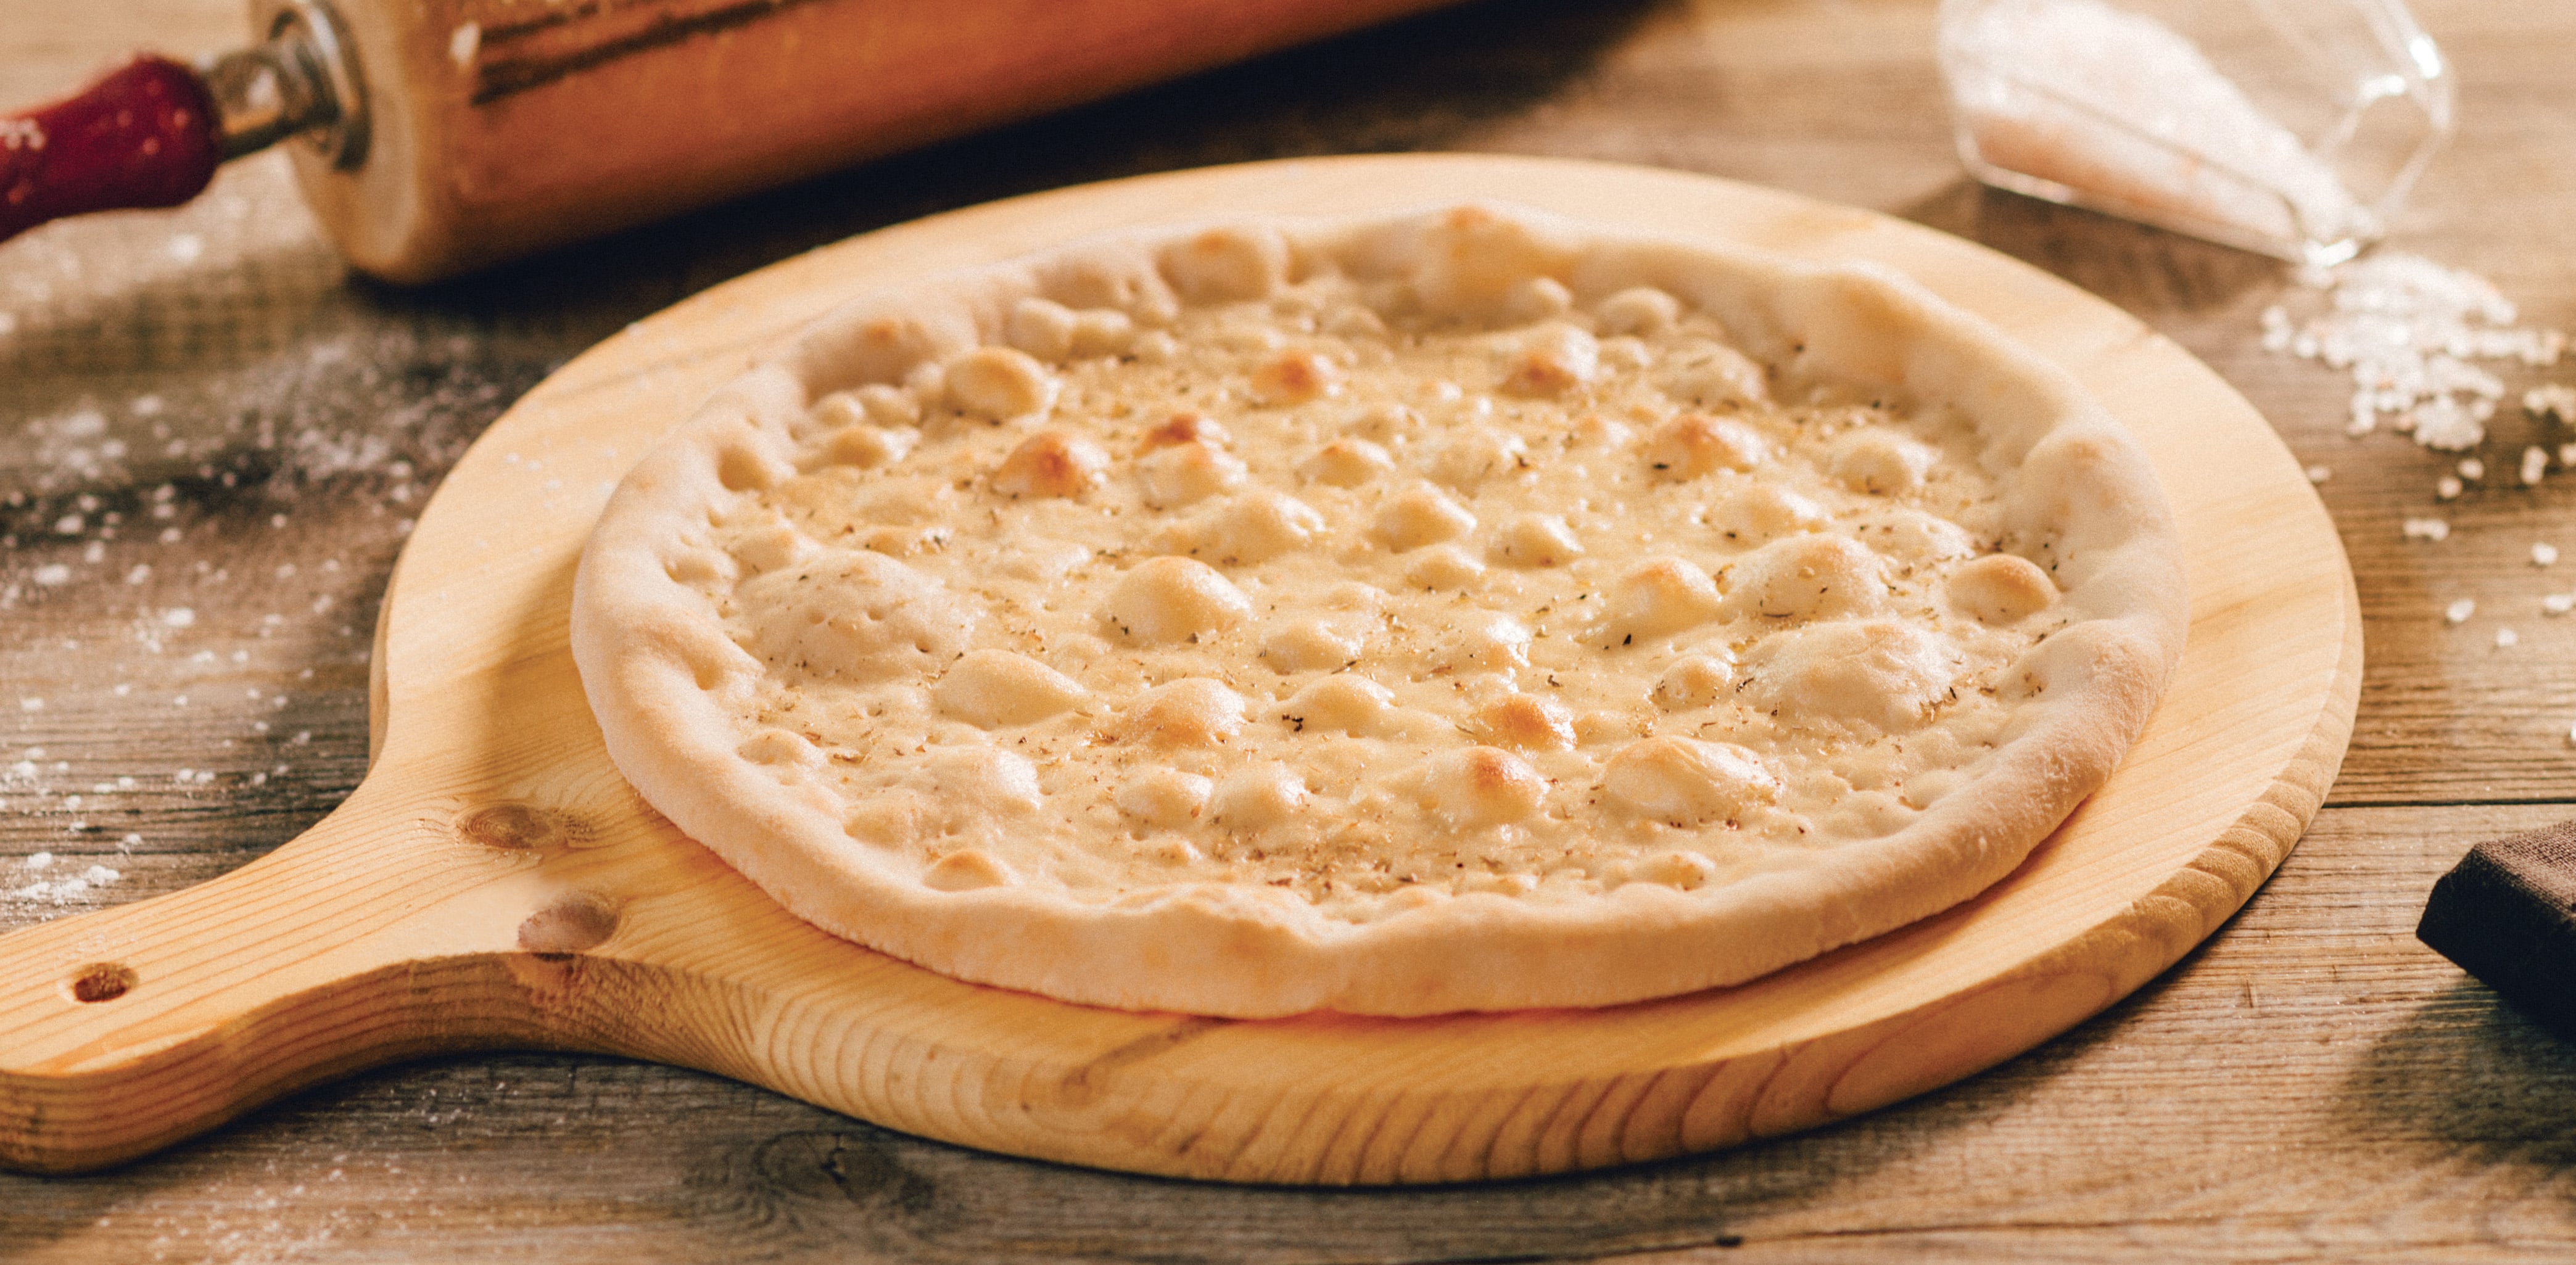 Frozen Gluten Free pizza crust 30 cm -- Pizzami brand and Foodservice